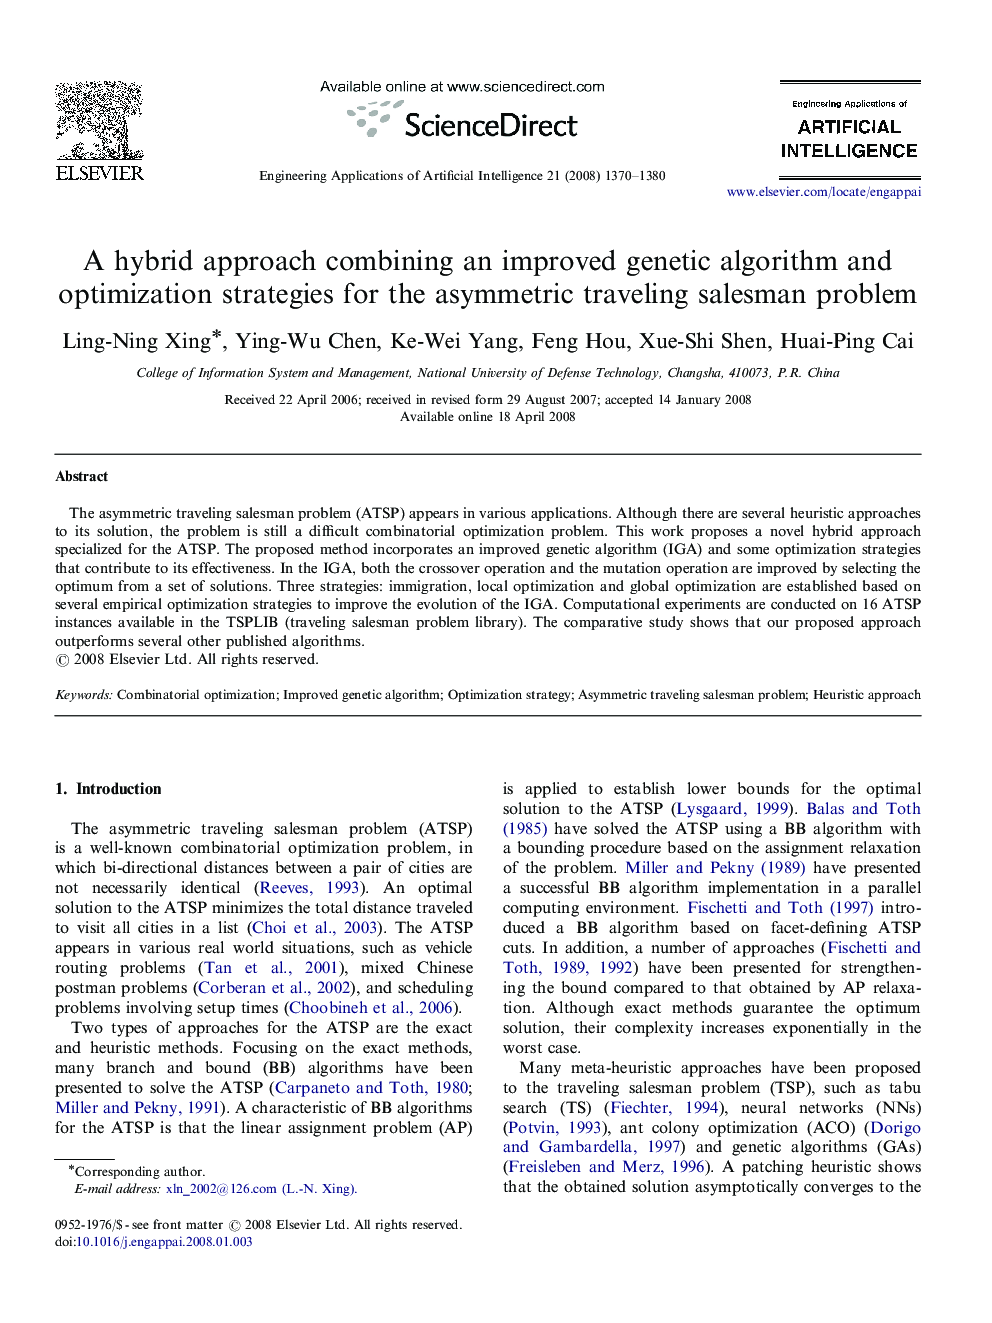 A hybrid approach combining an improved genetic algorithm and optimization strategies for the asymmetric traveling salesman problem